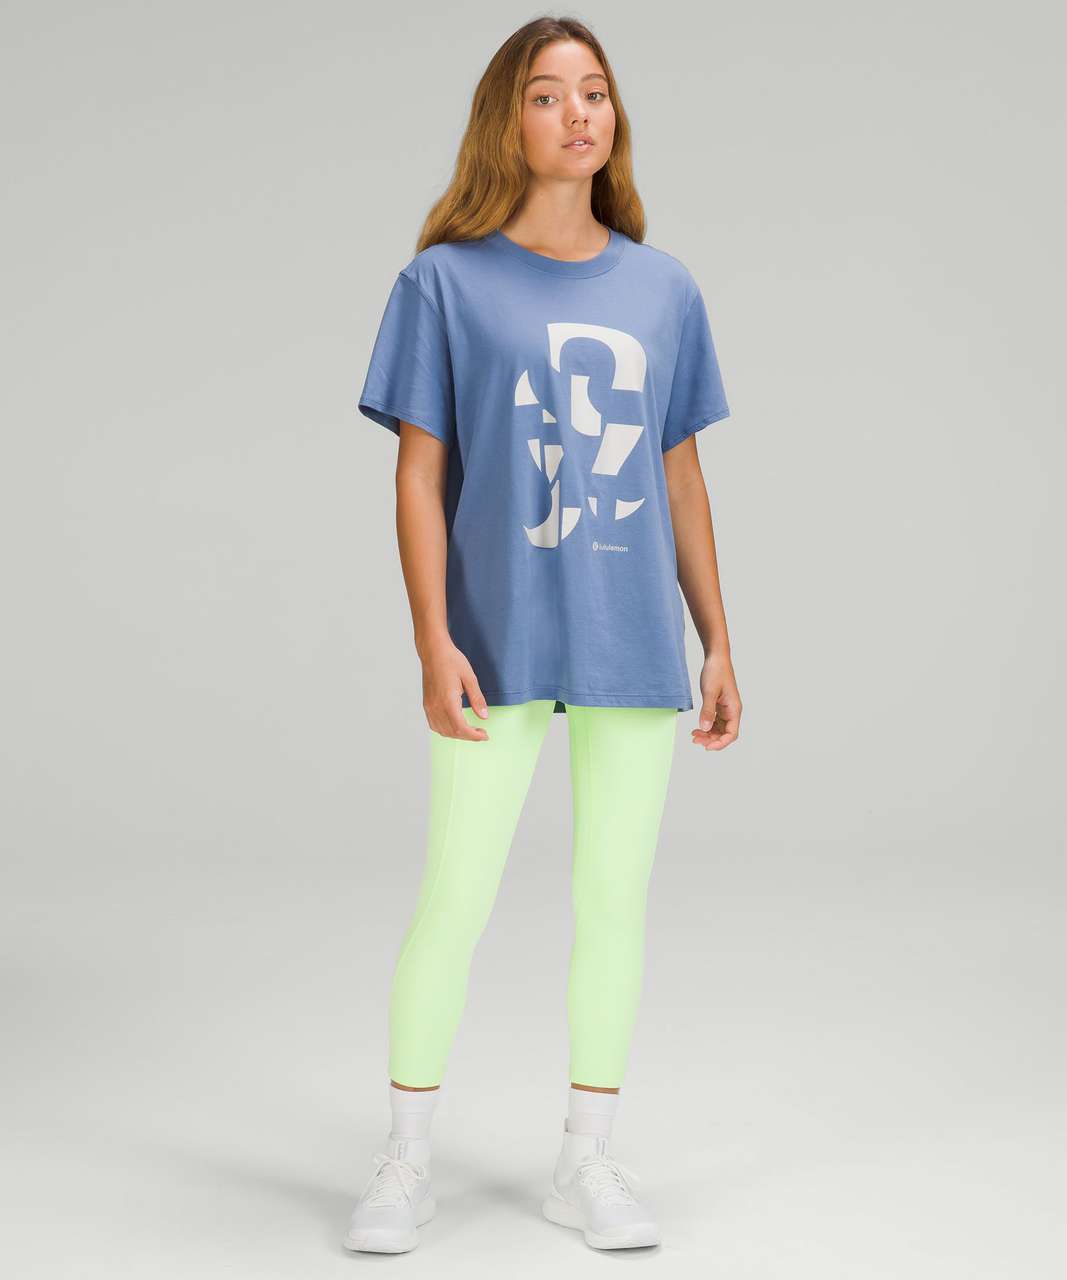 Lululemon All Yours Cotton T-Shirt - Water Drop